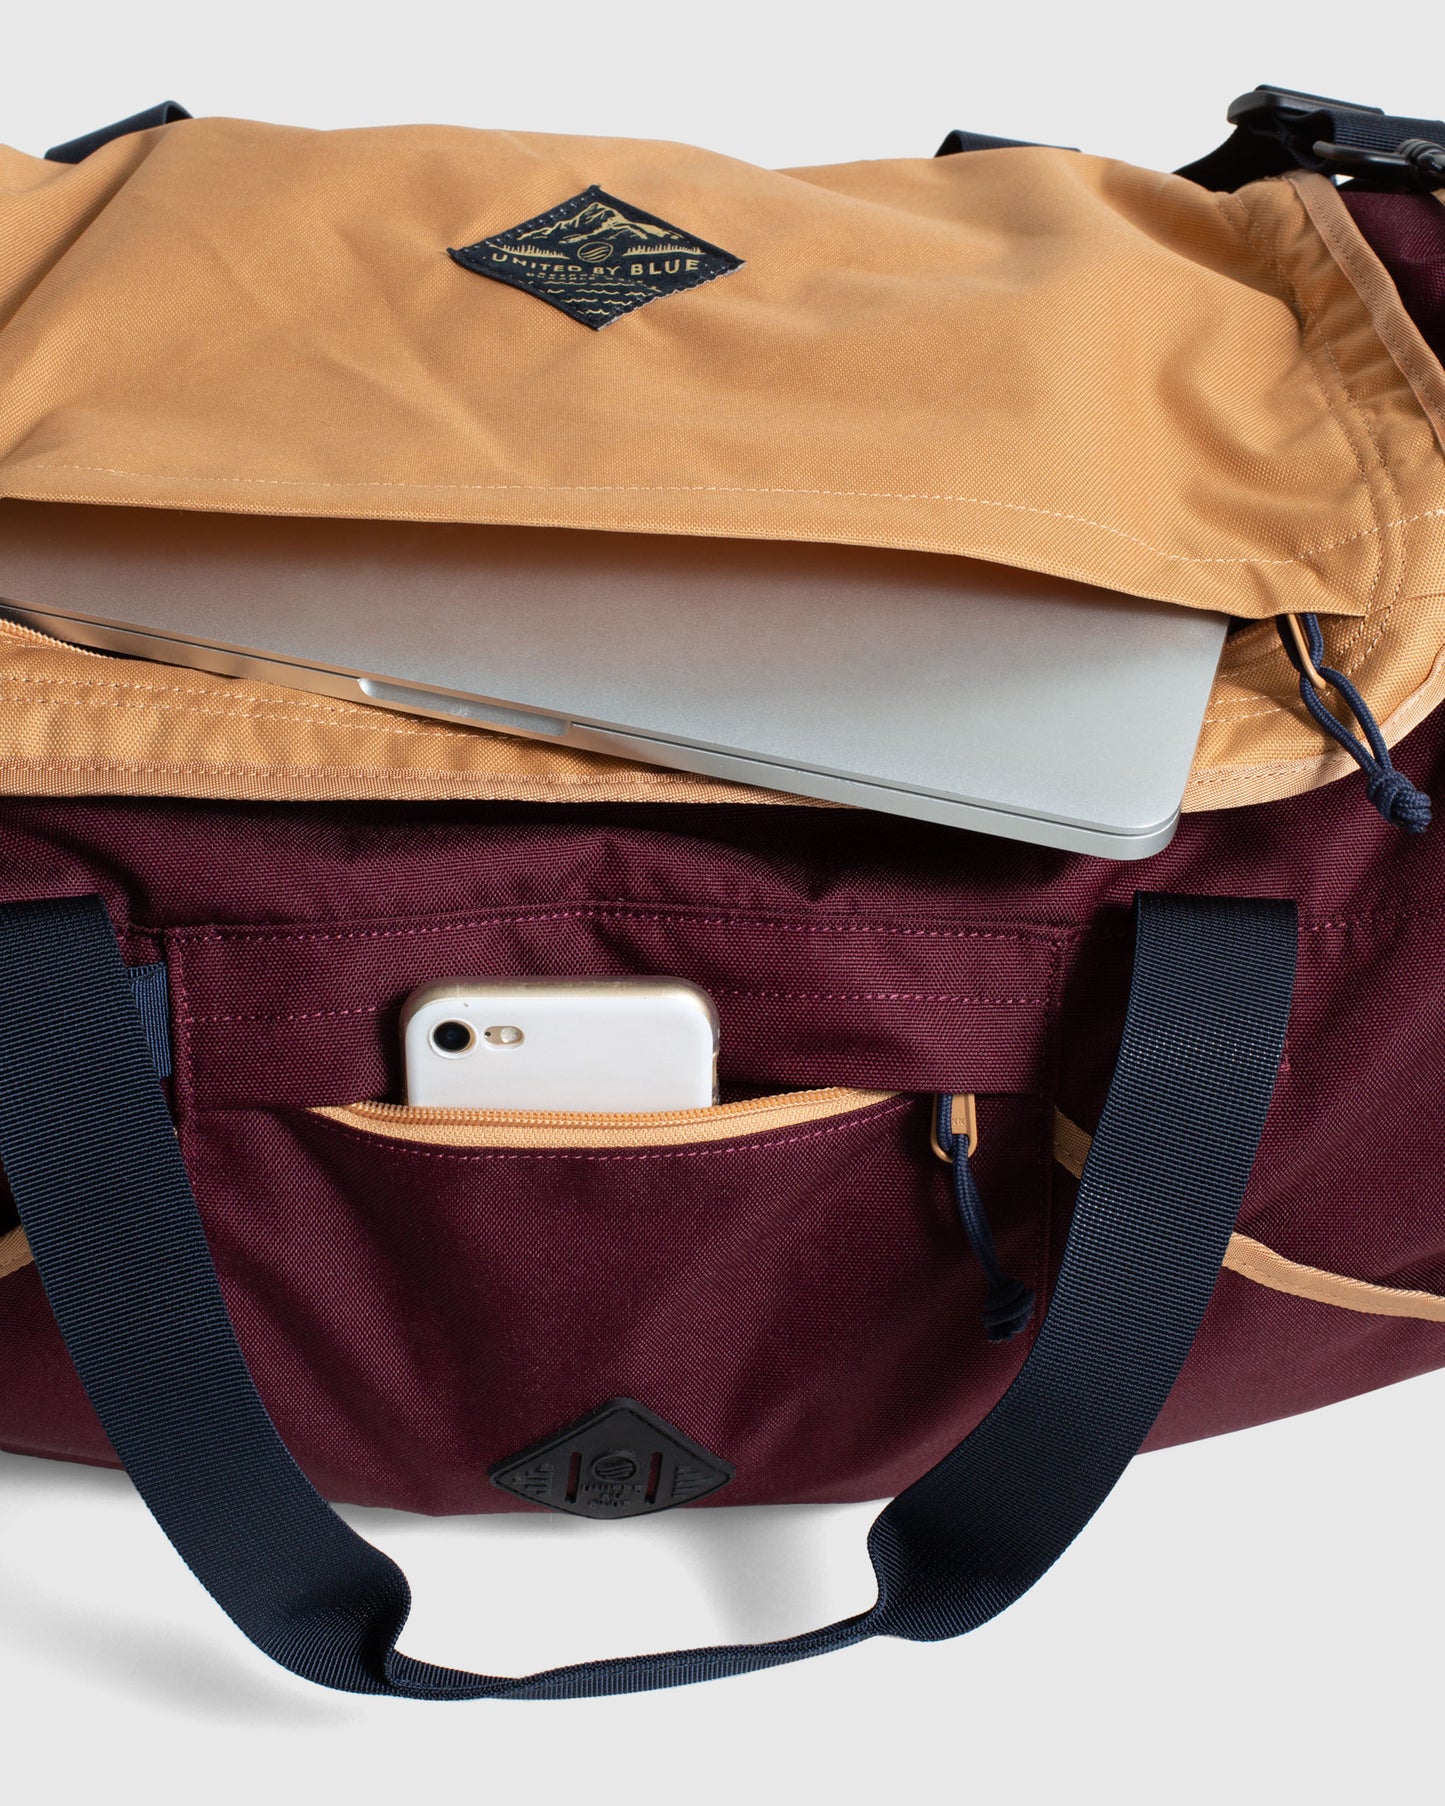 Additional pockets in duffle bag by United by Blue